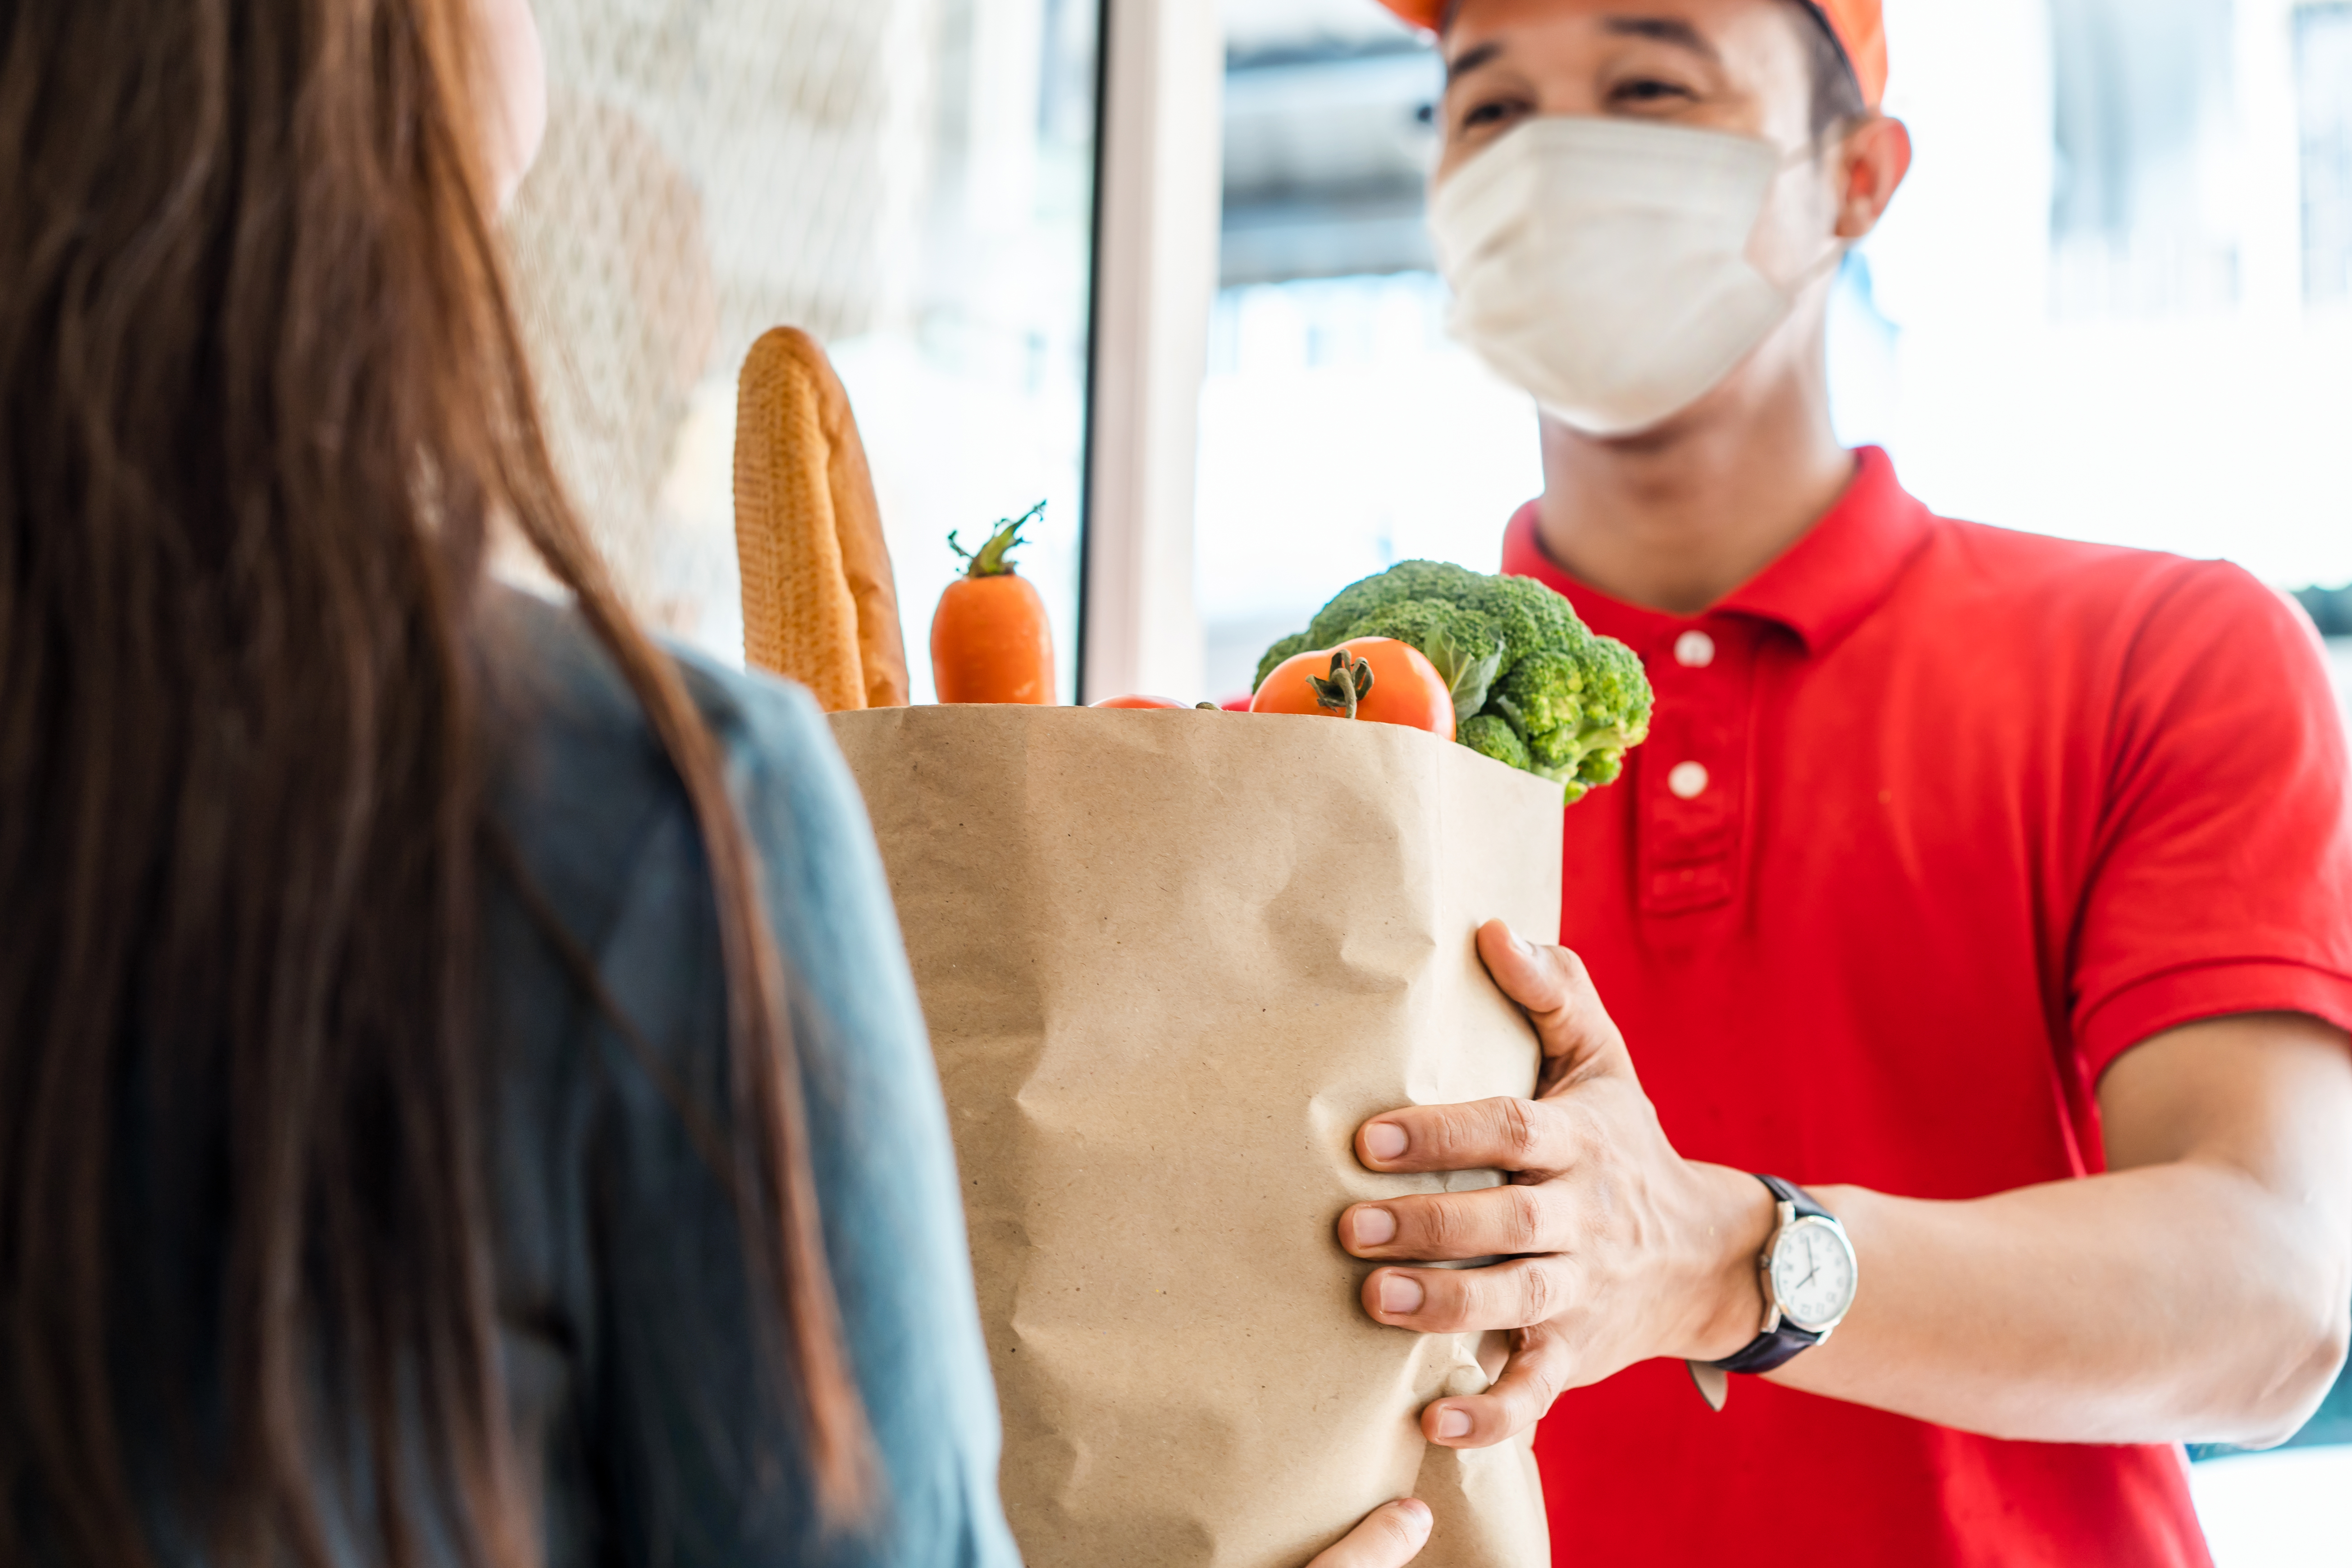 The best NYC grocery delivery services: Fresh Direct, Instacart